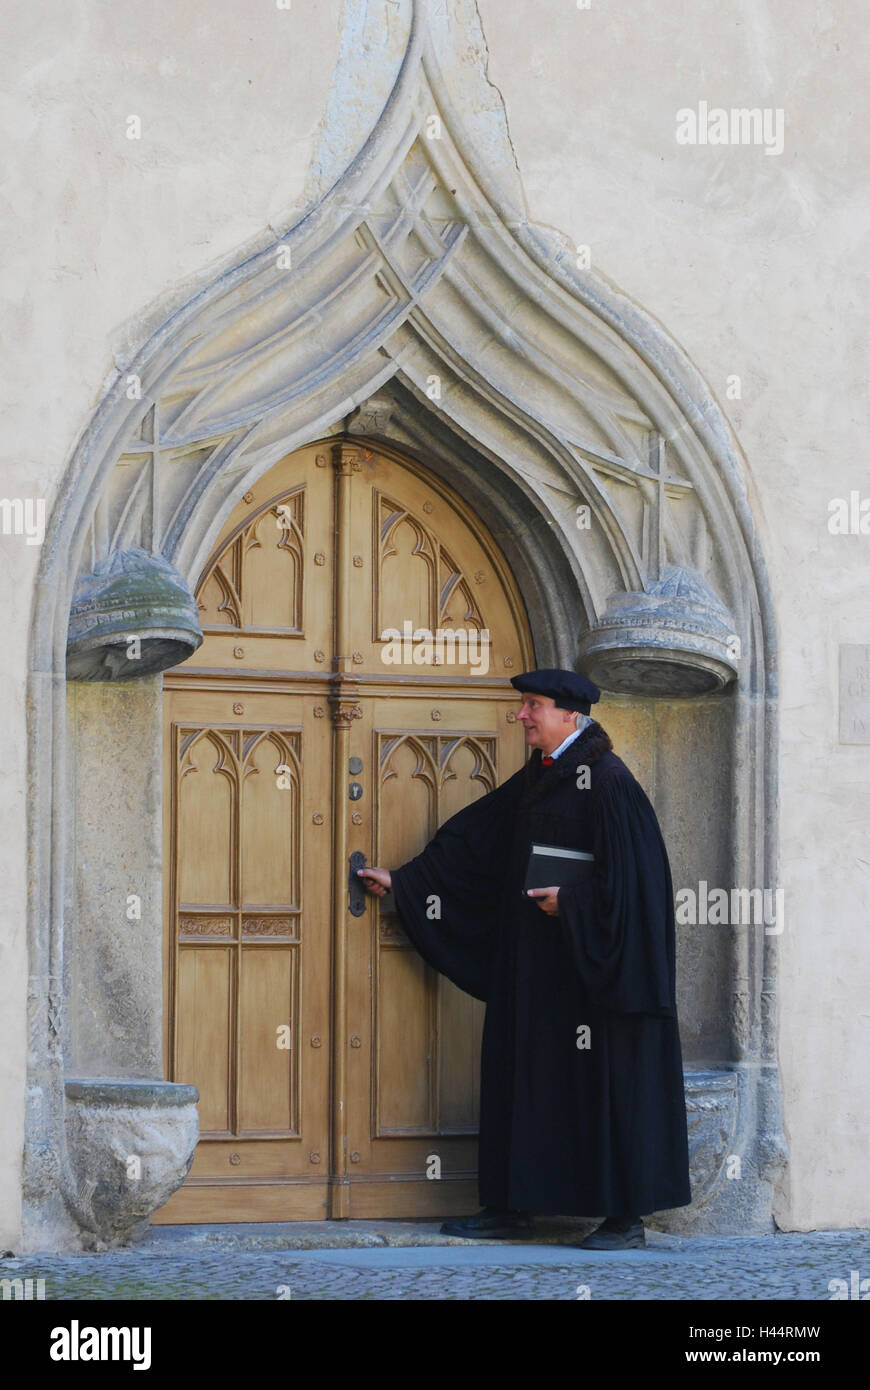 Germany, Saxony-Anhalt, Lutherstadt Wittenberg, residential house Martin Luther, UNESCO world heritage, actor, Haustüre, Stock Photo